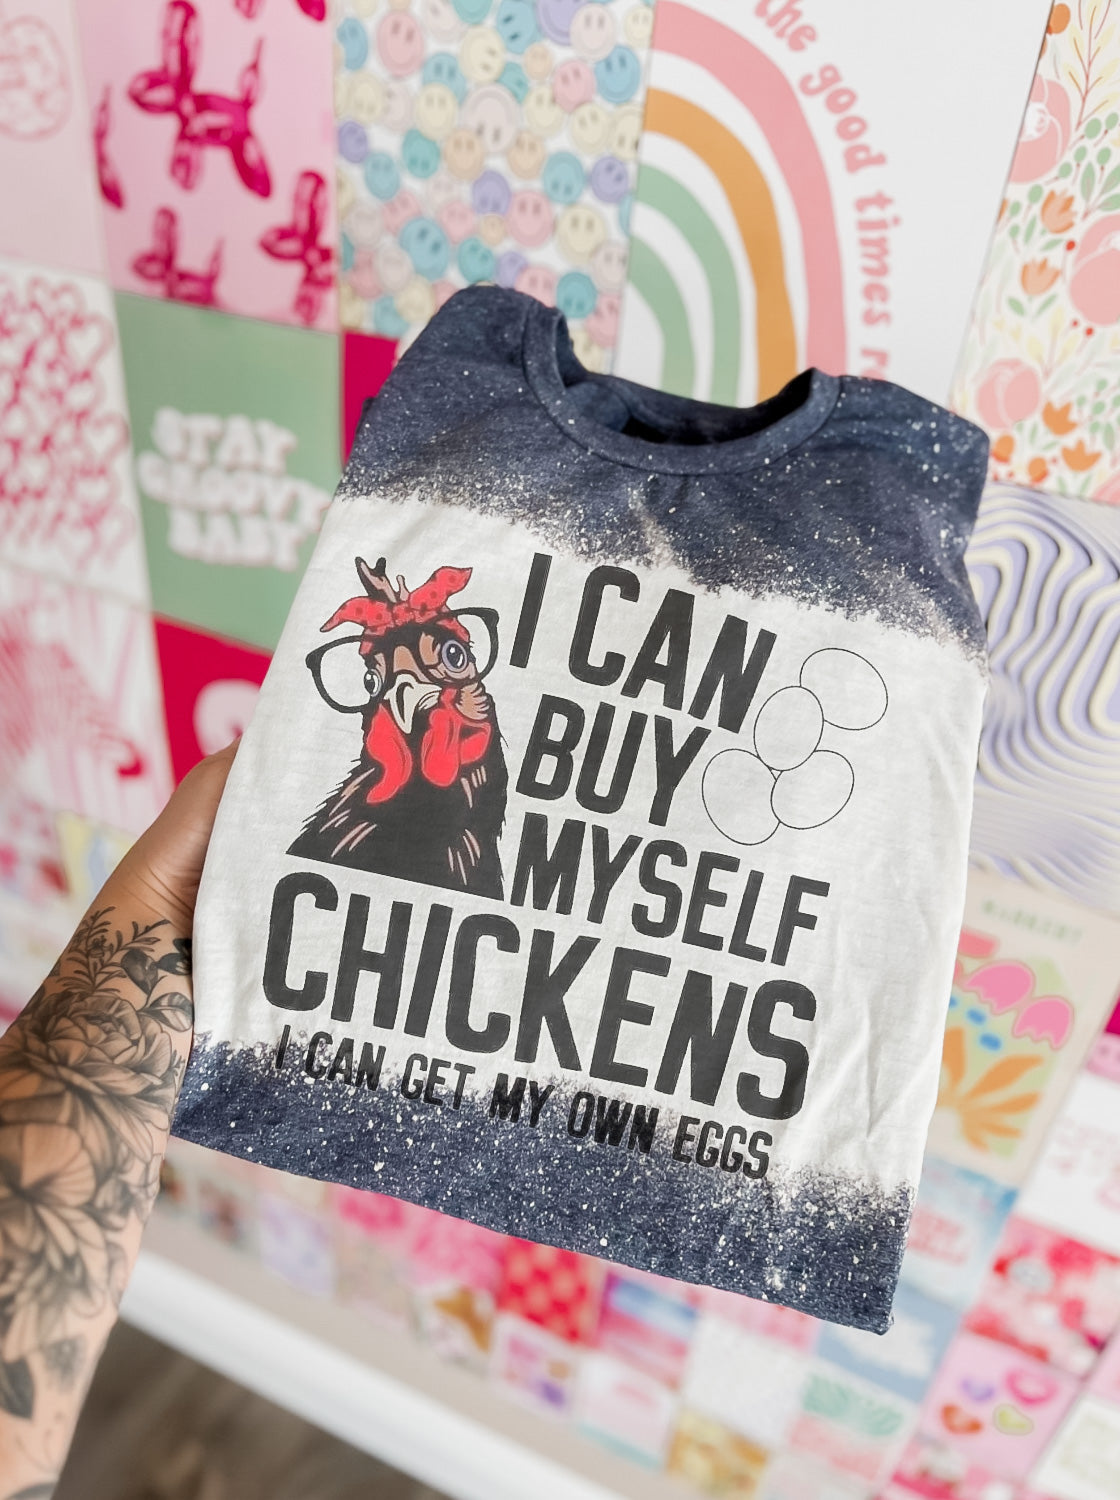 I can buy myself chickens